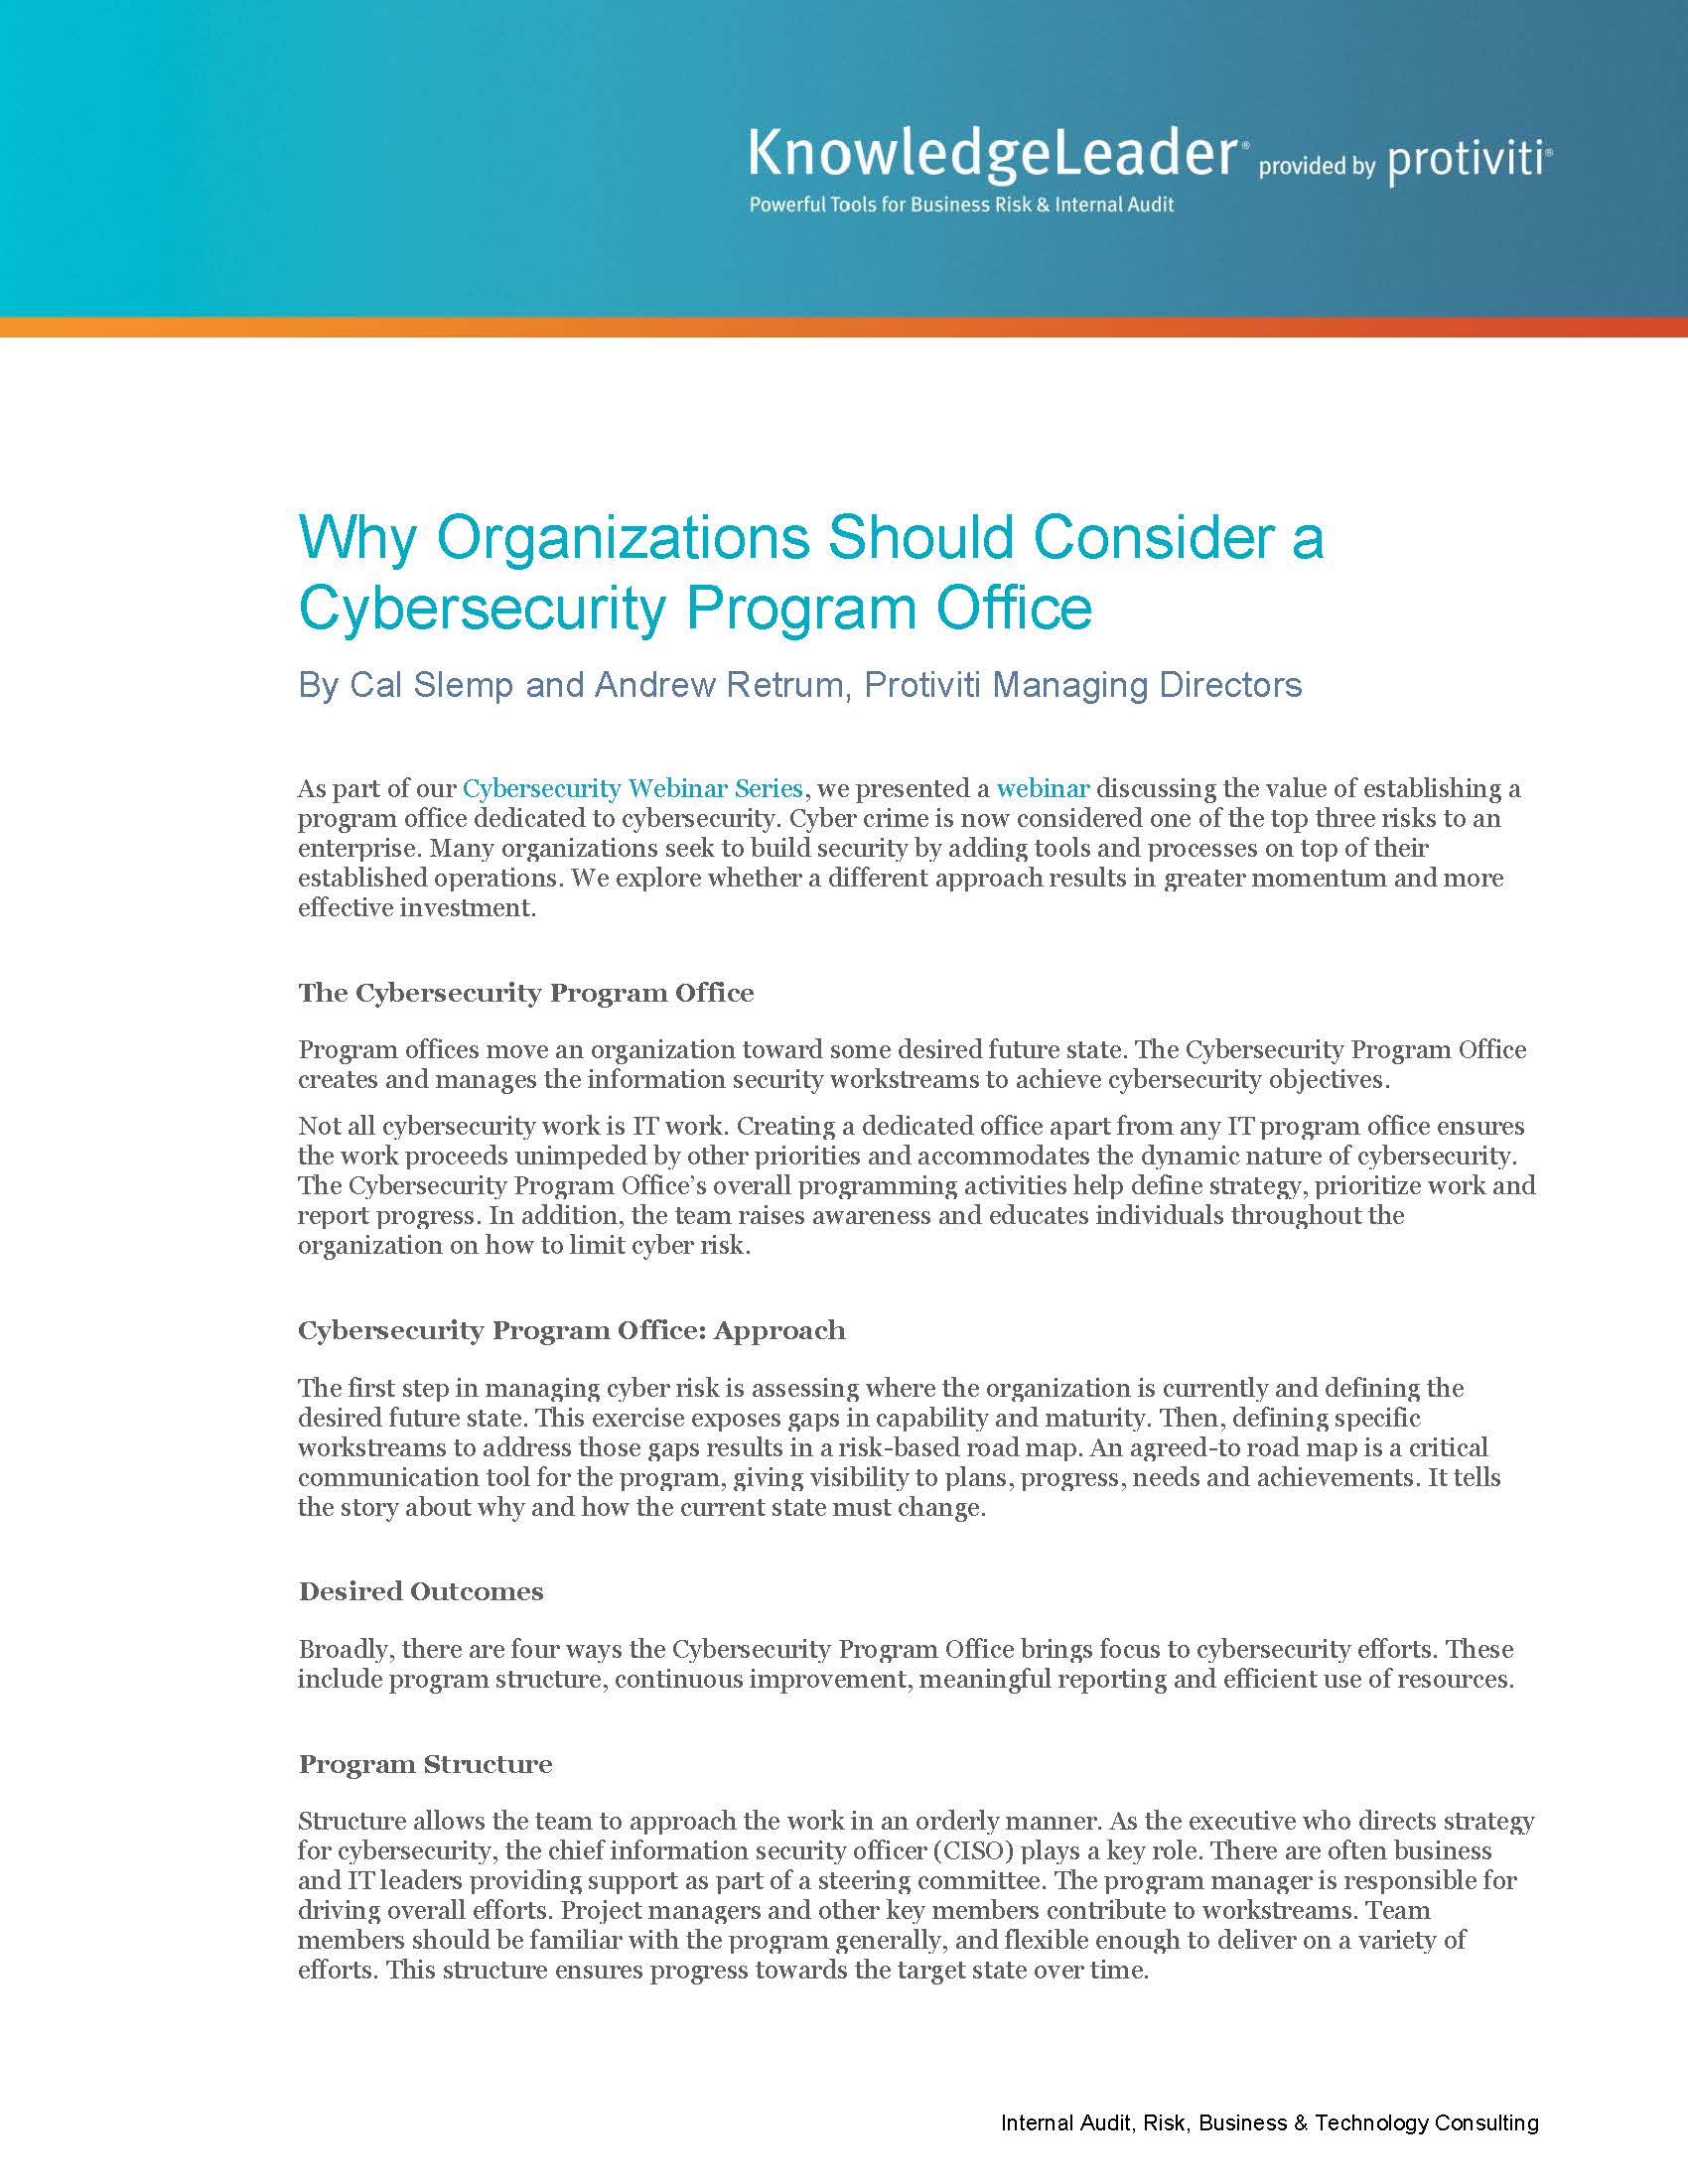 Screenshot of the first page of Why Organizations Should Consider a Cybersecurity Program Office